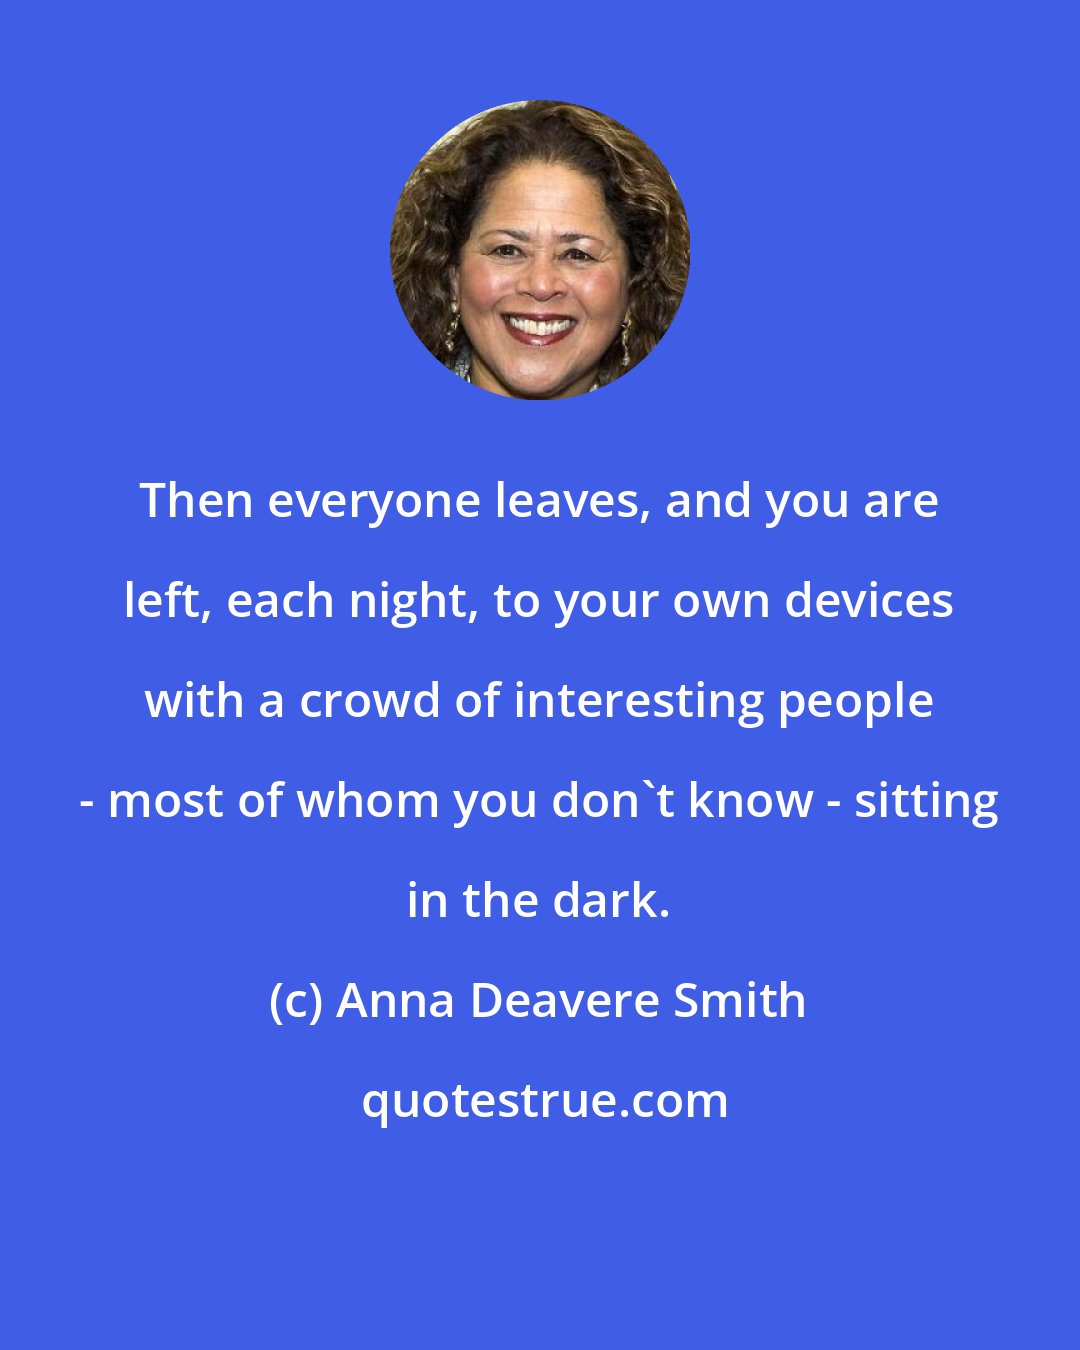 Anna Deavere Smith: Then everyone leaves, and you are left, each night, to your own devices with a crowd of interesting people - most of whom you don't know - sitting in the dark.